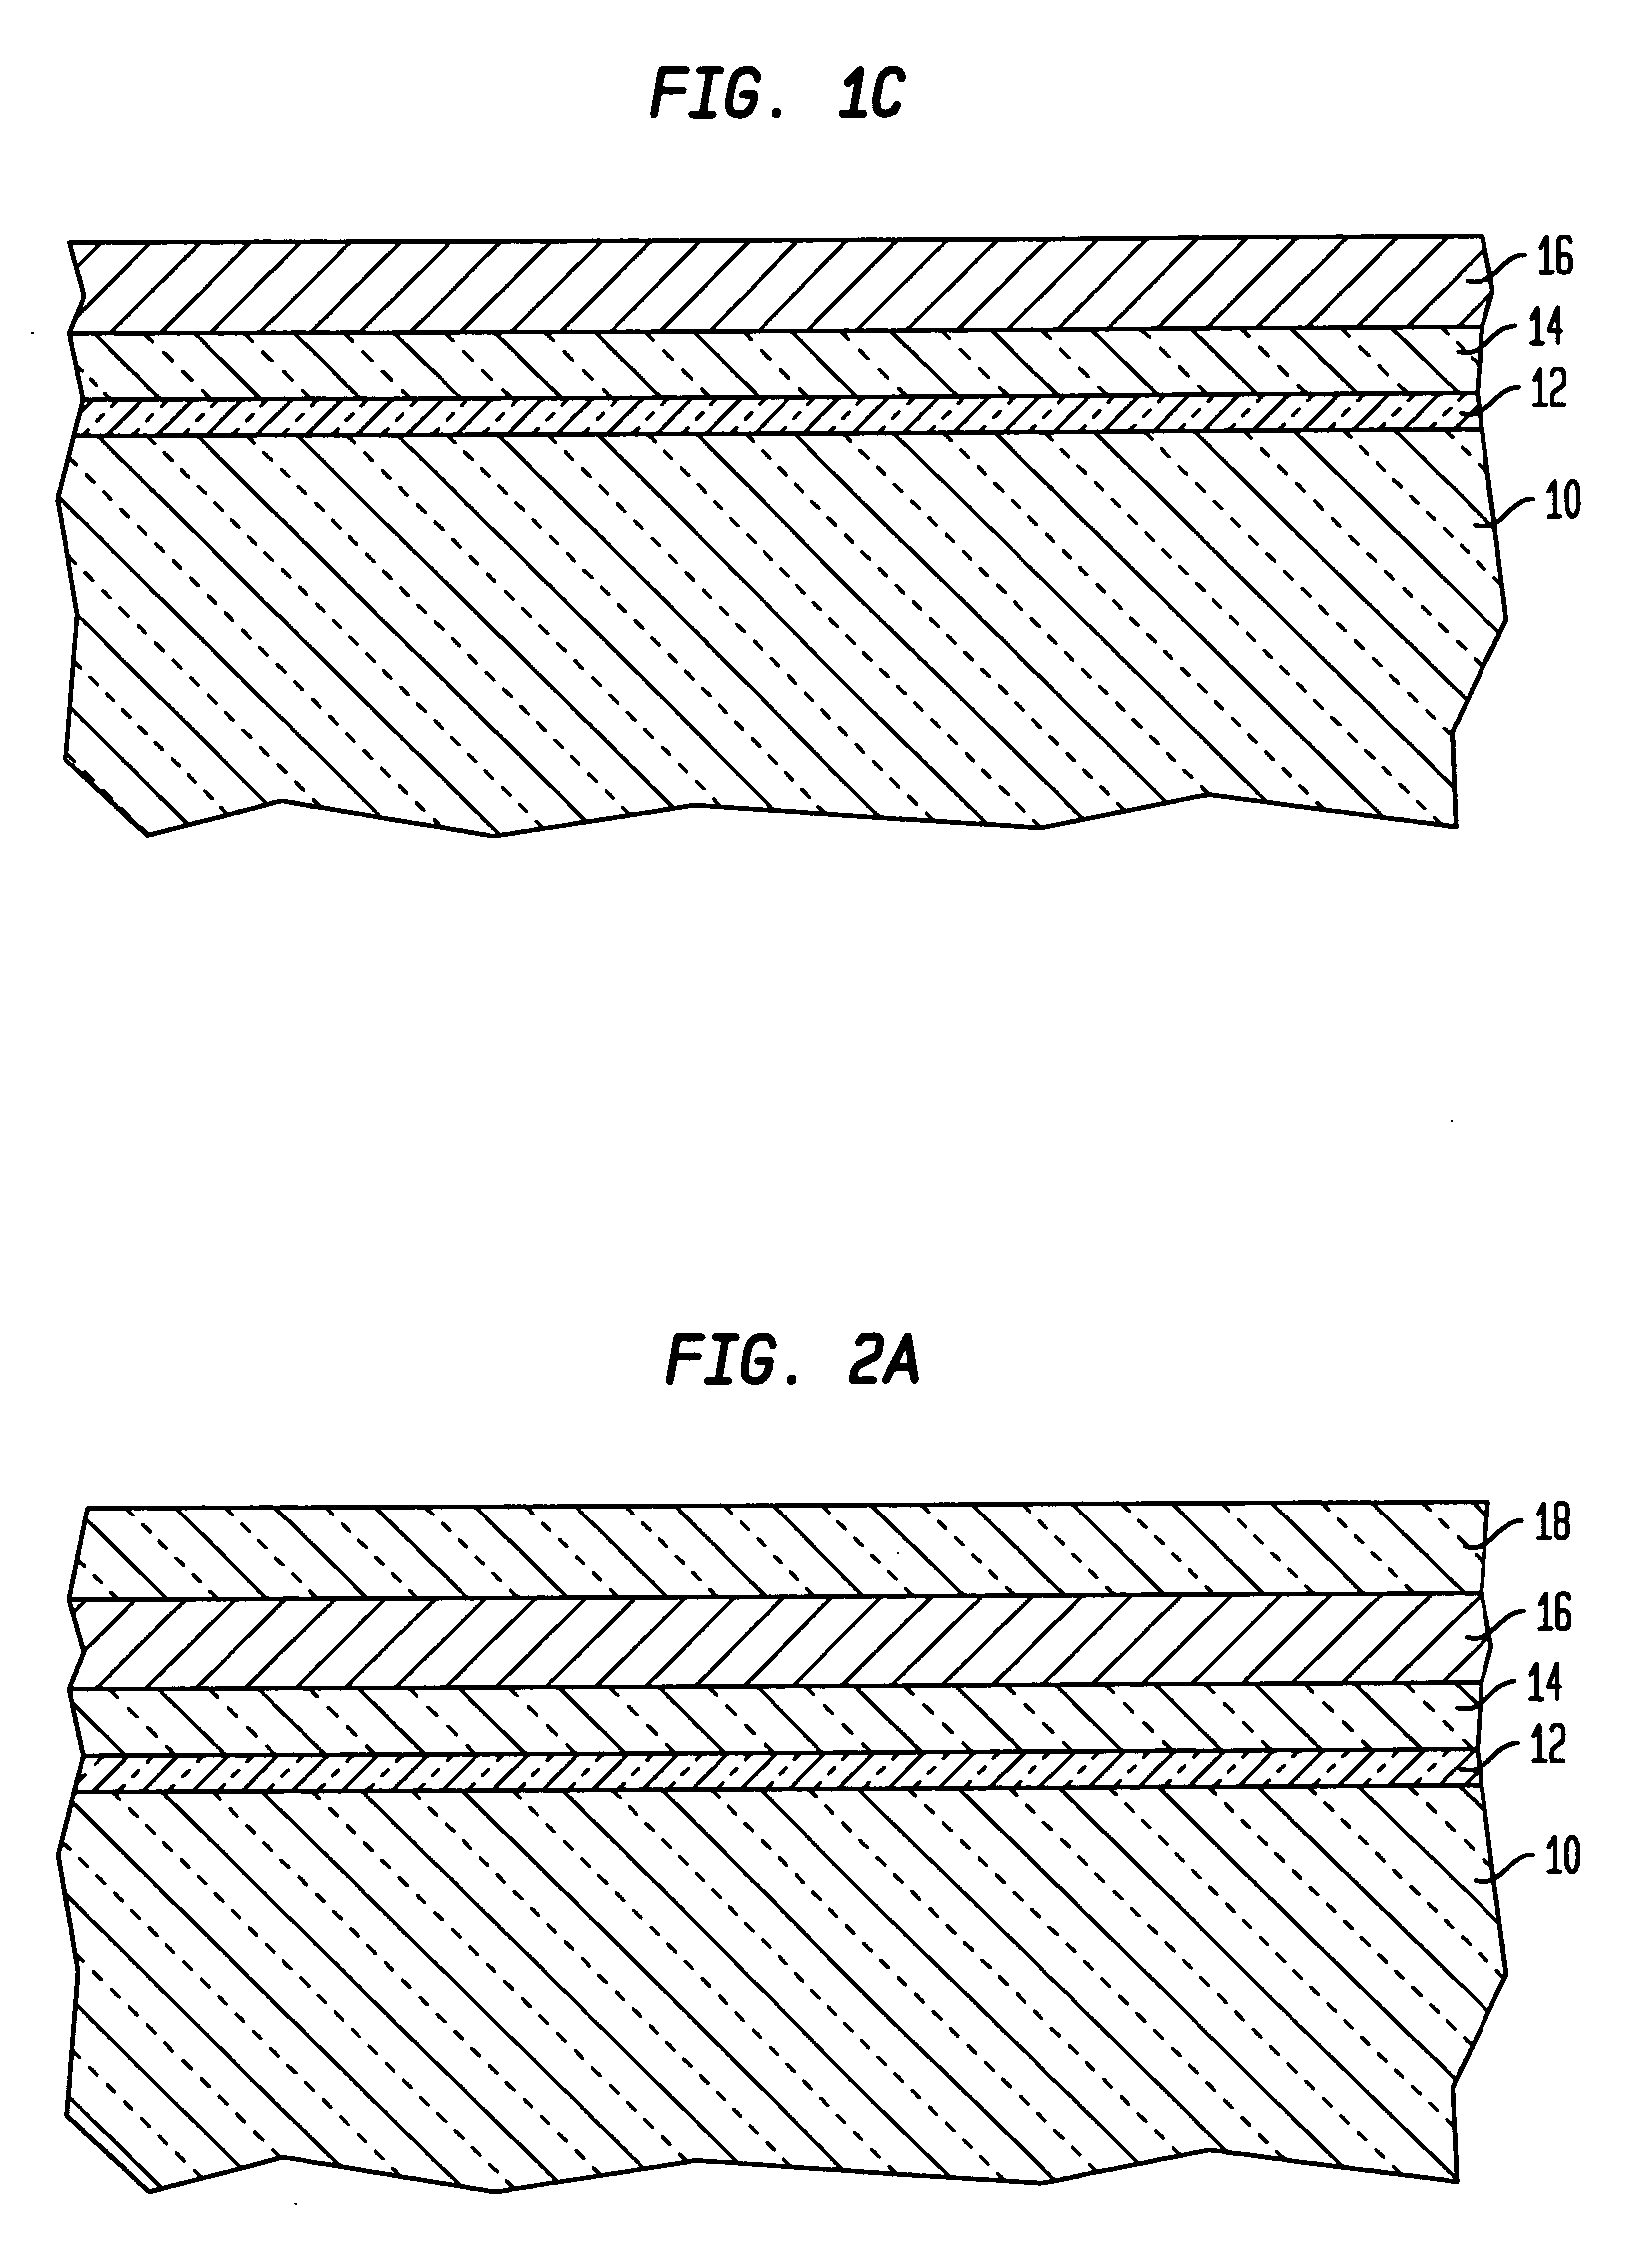 Metal oxynitride as a pFET material